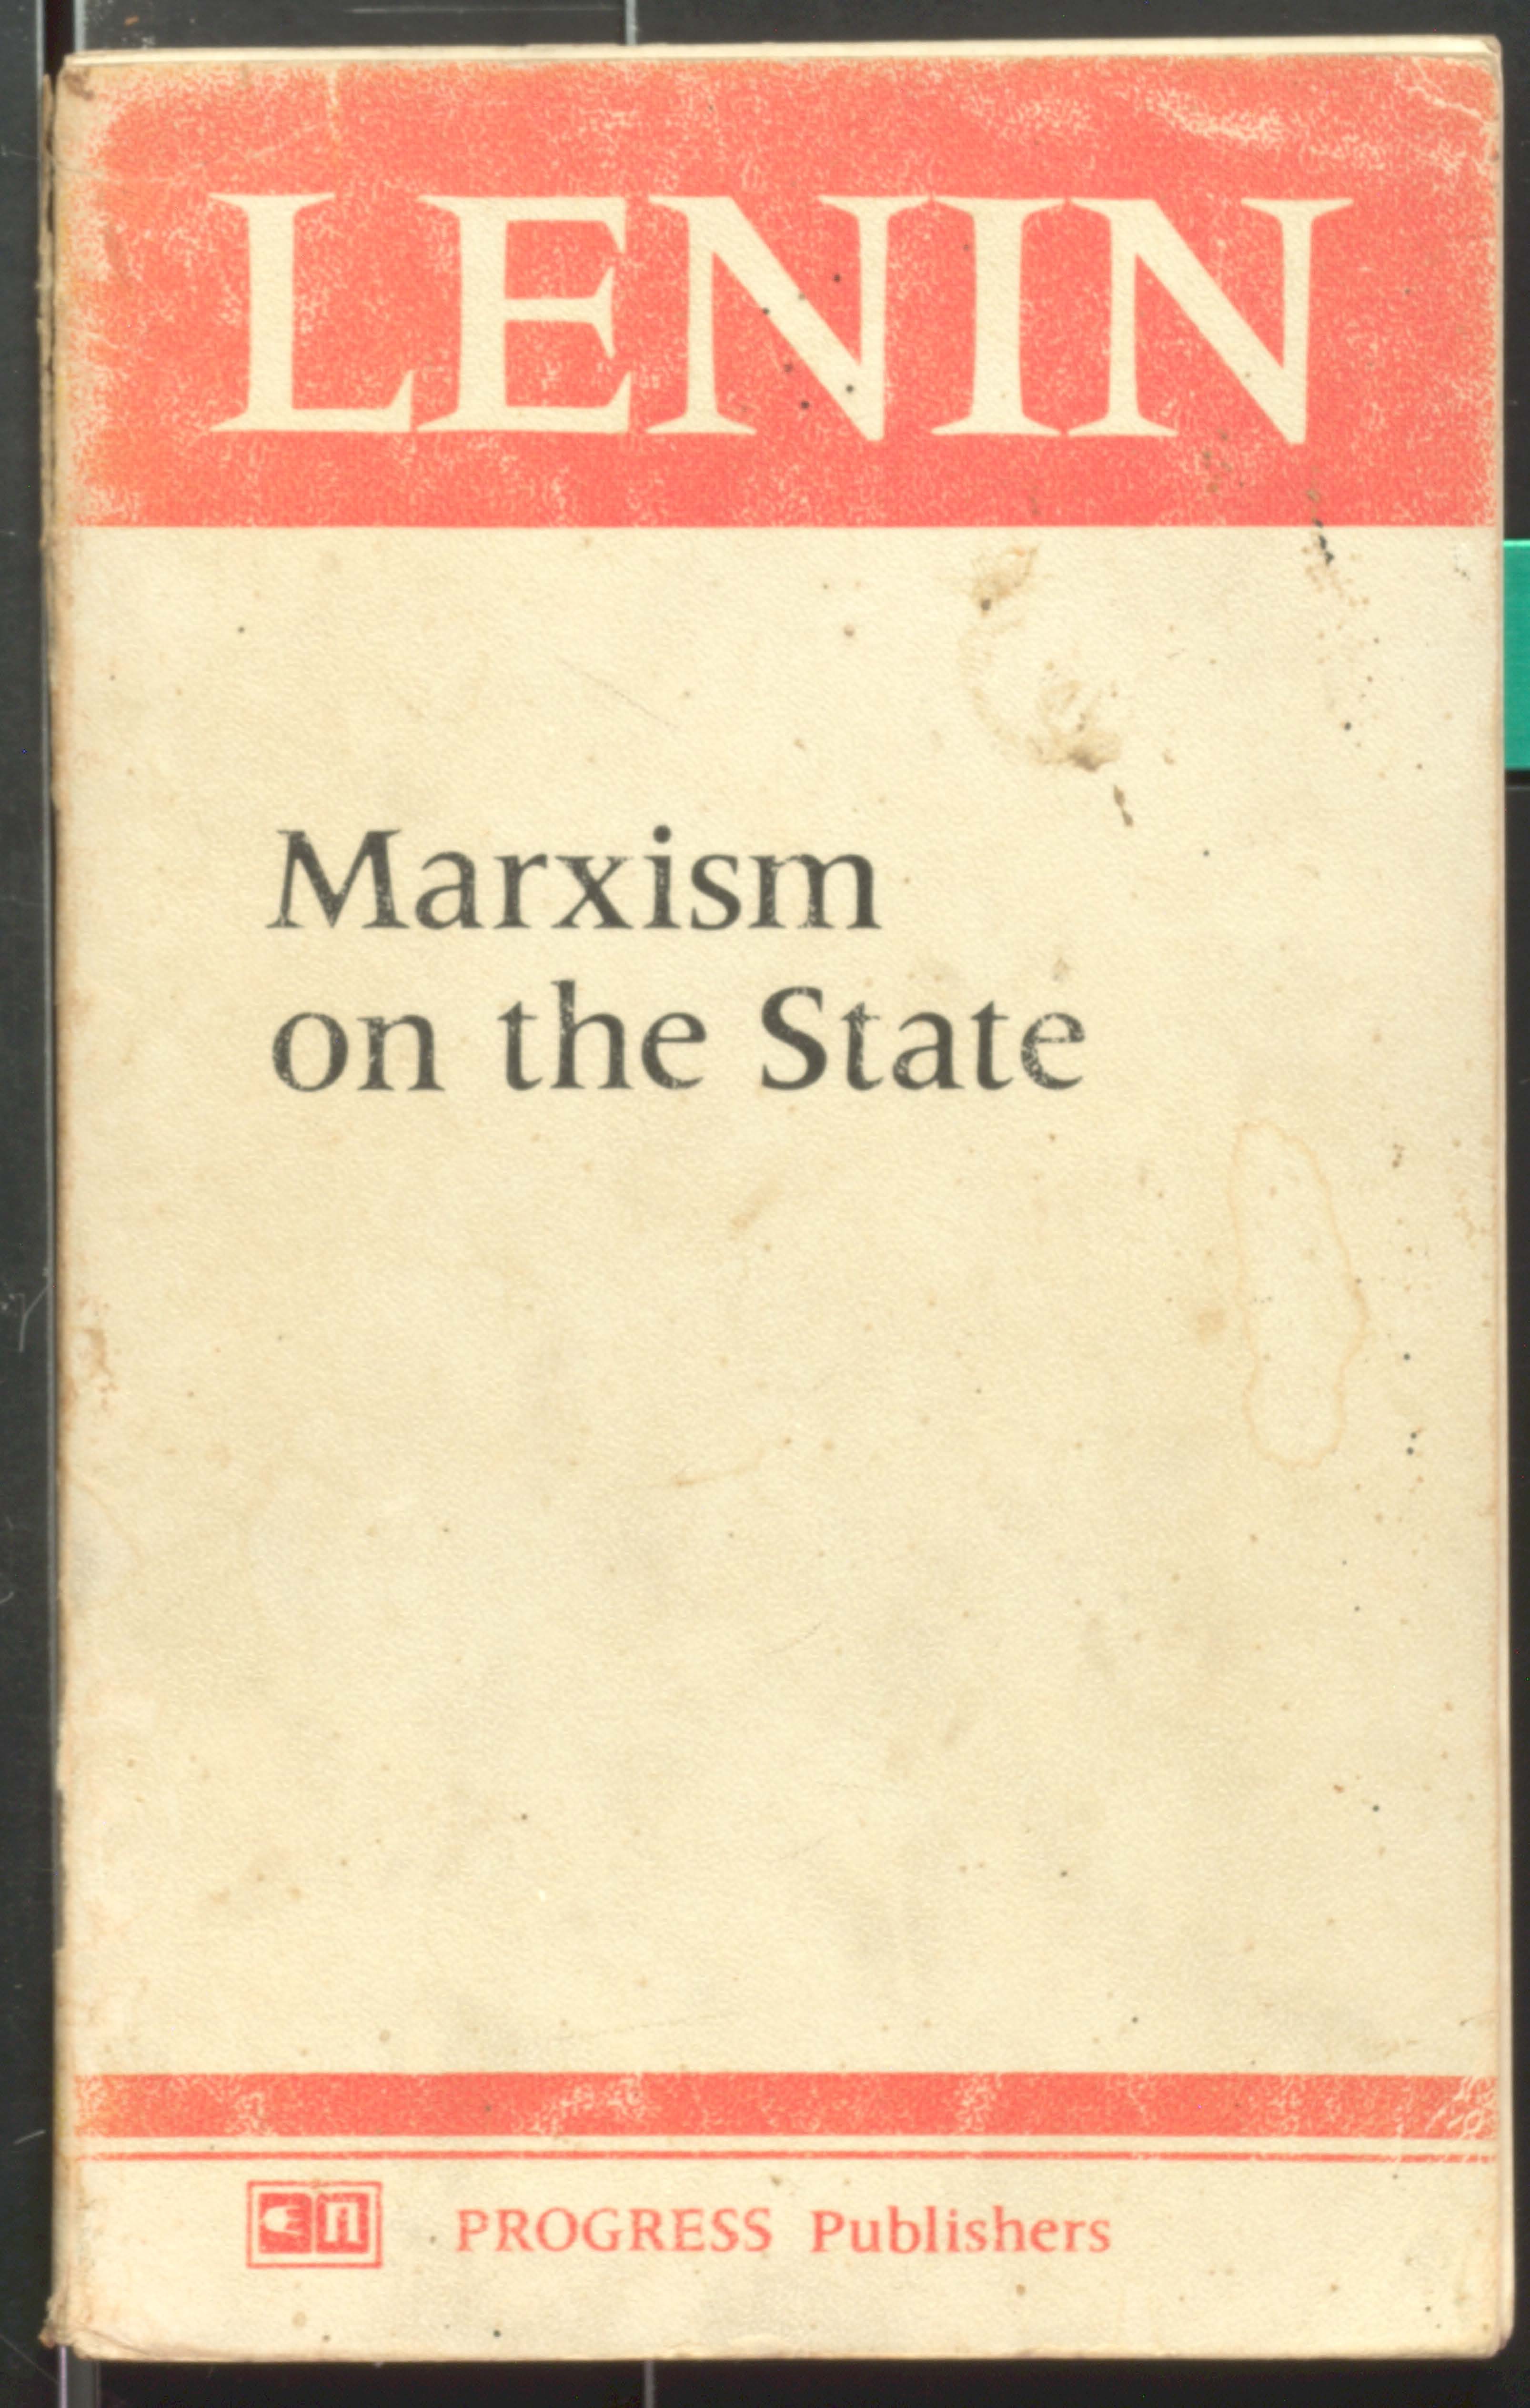 LENIN Marism on the State